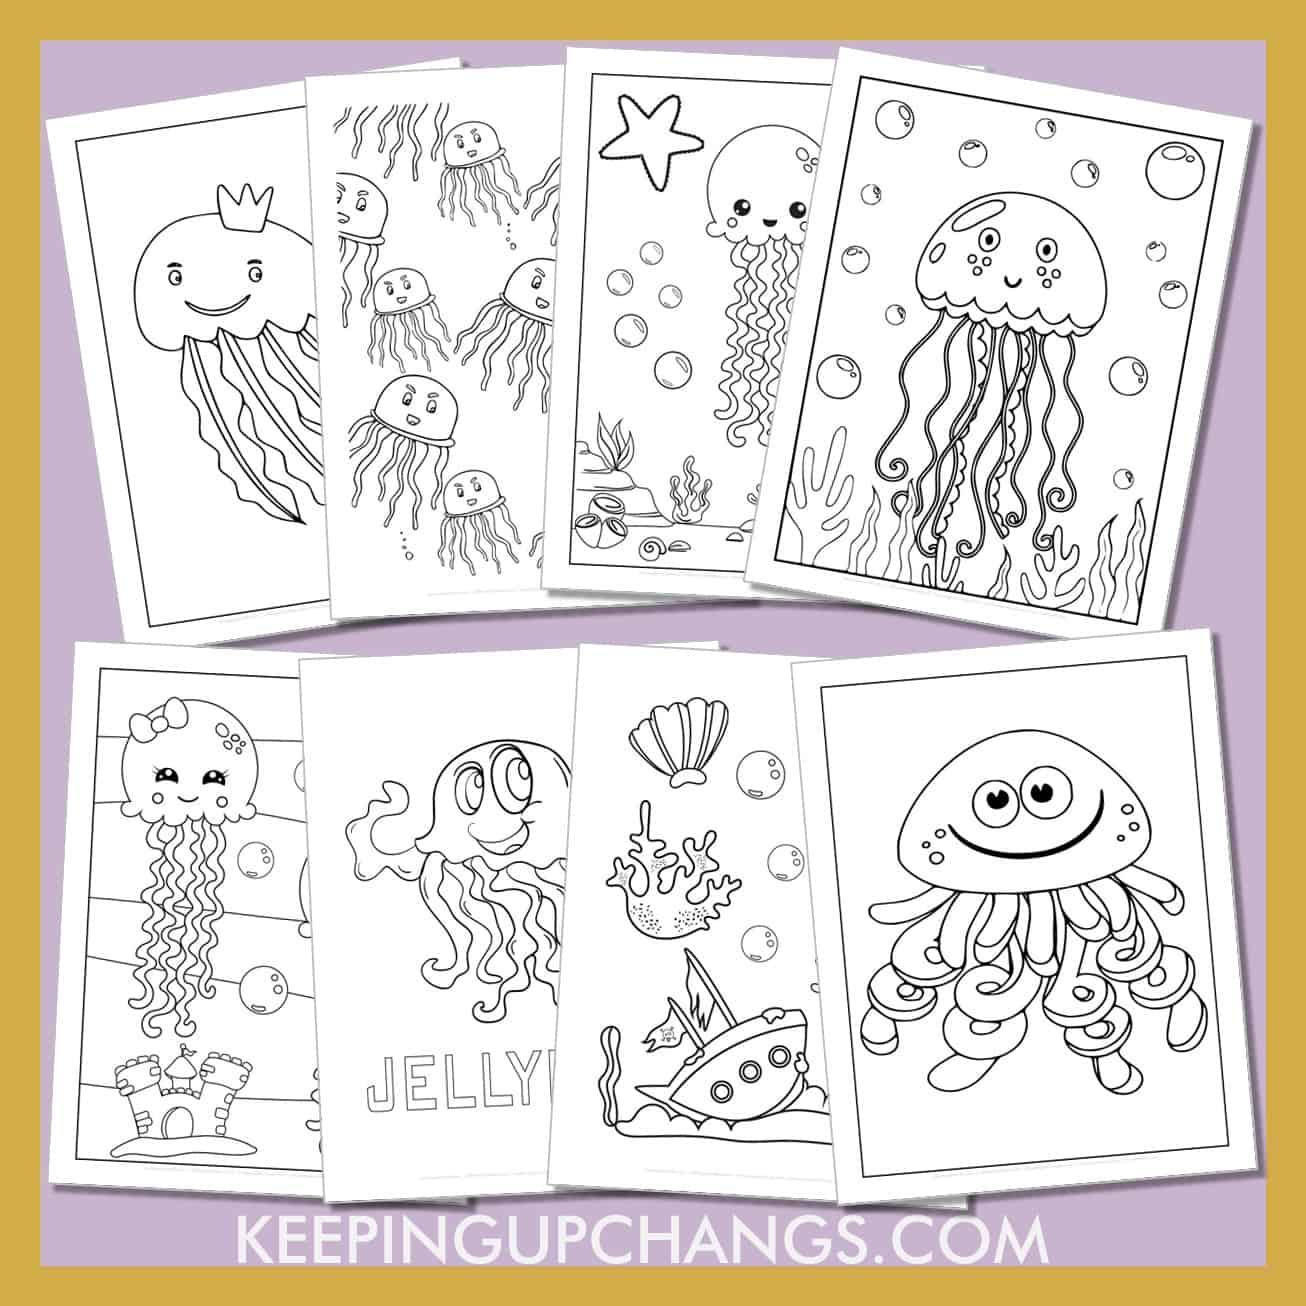 free jellyfish pictures to color for toddlers, kids, adults.